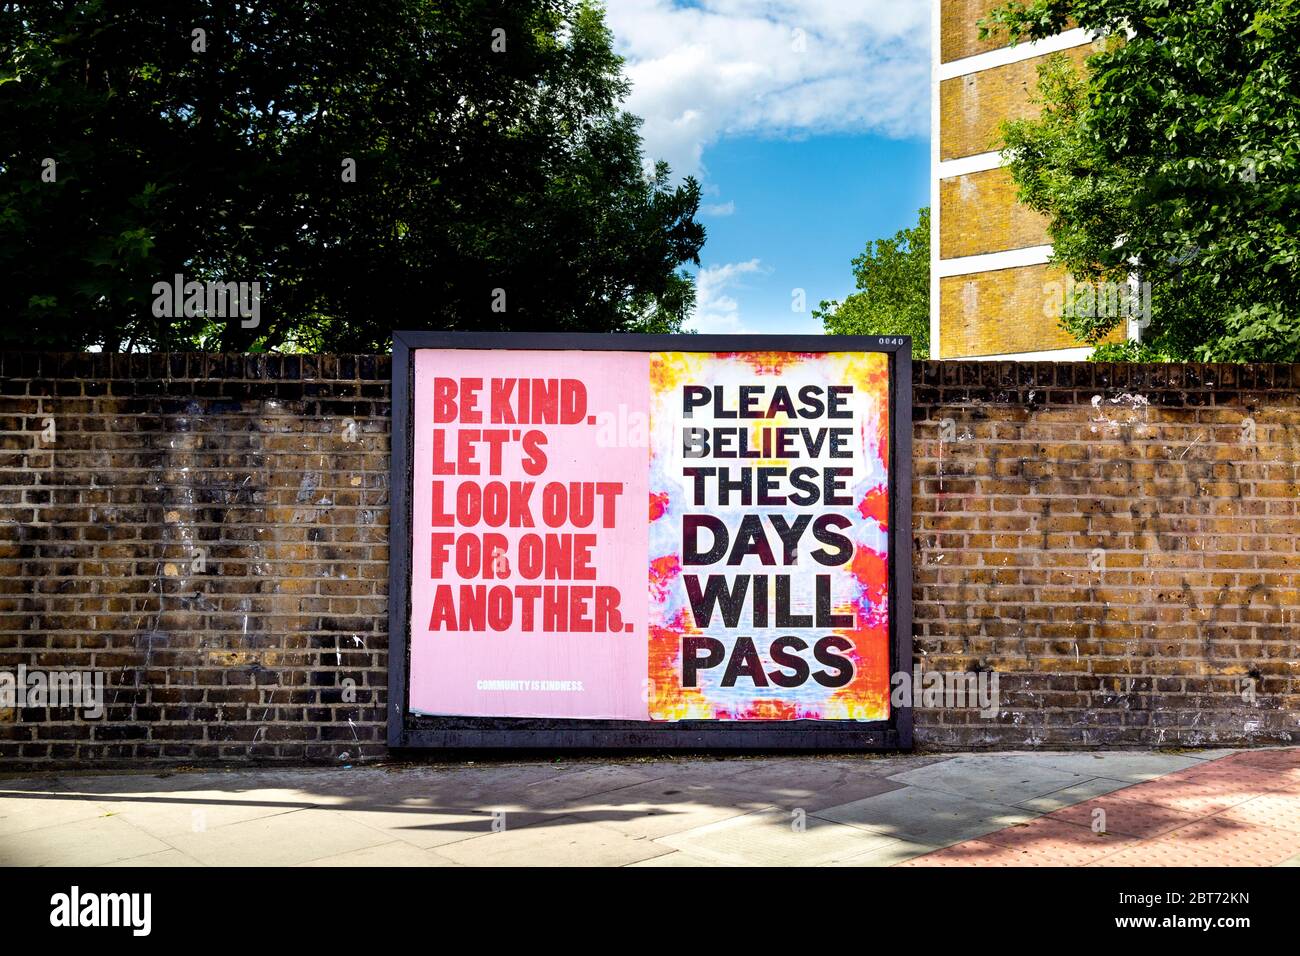 22 May 2020 London, UK - Signs of encouragement in Stoke Newington during the Coronavirus pandemic outbreak, 'Be Kind Let's Look Out for One Another' and 'Please Believe These Days Will Pass' Stock Photo